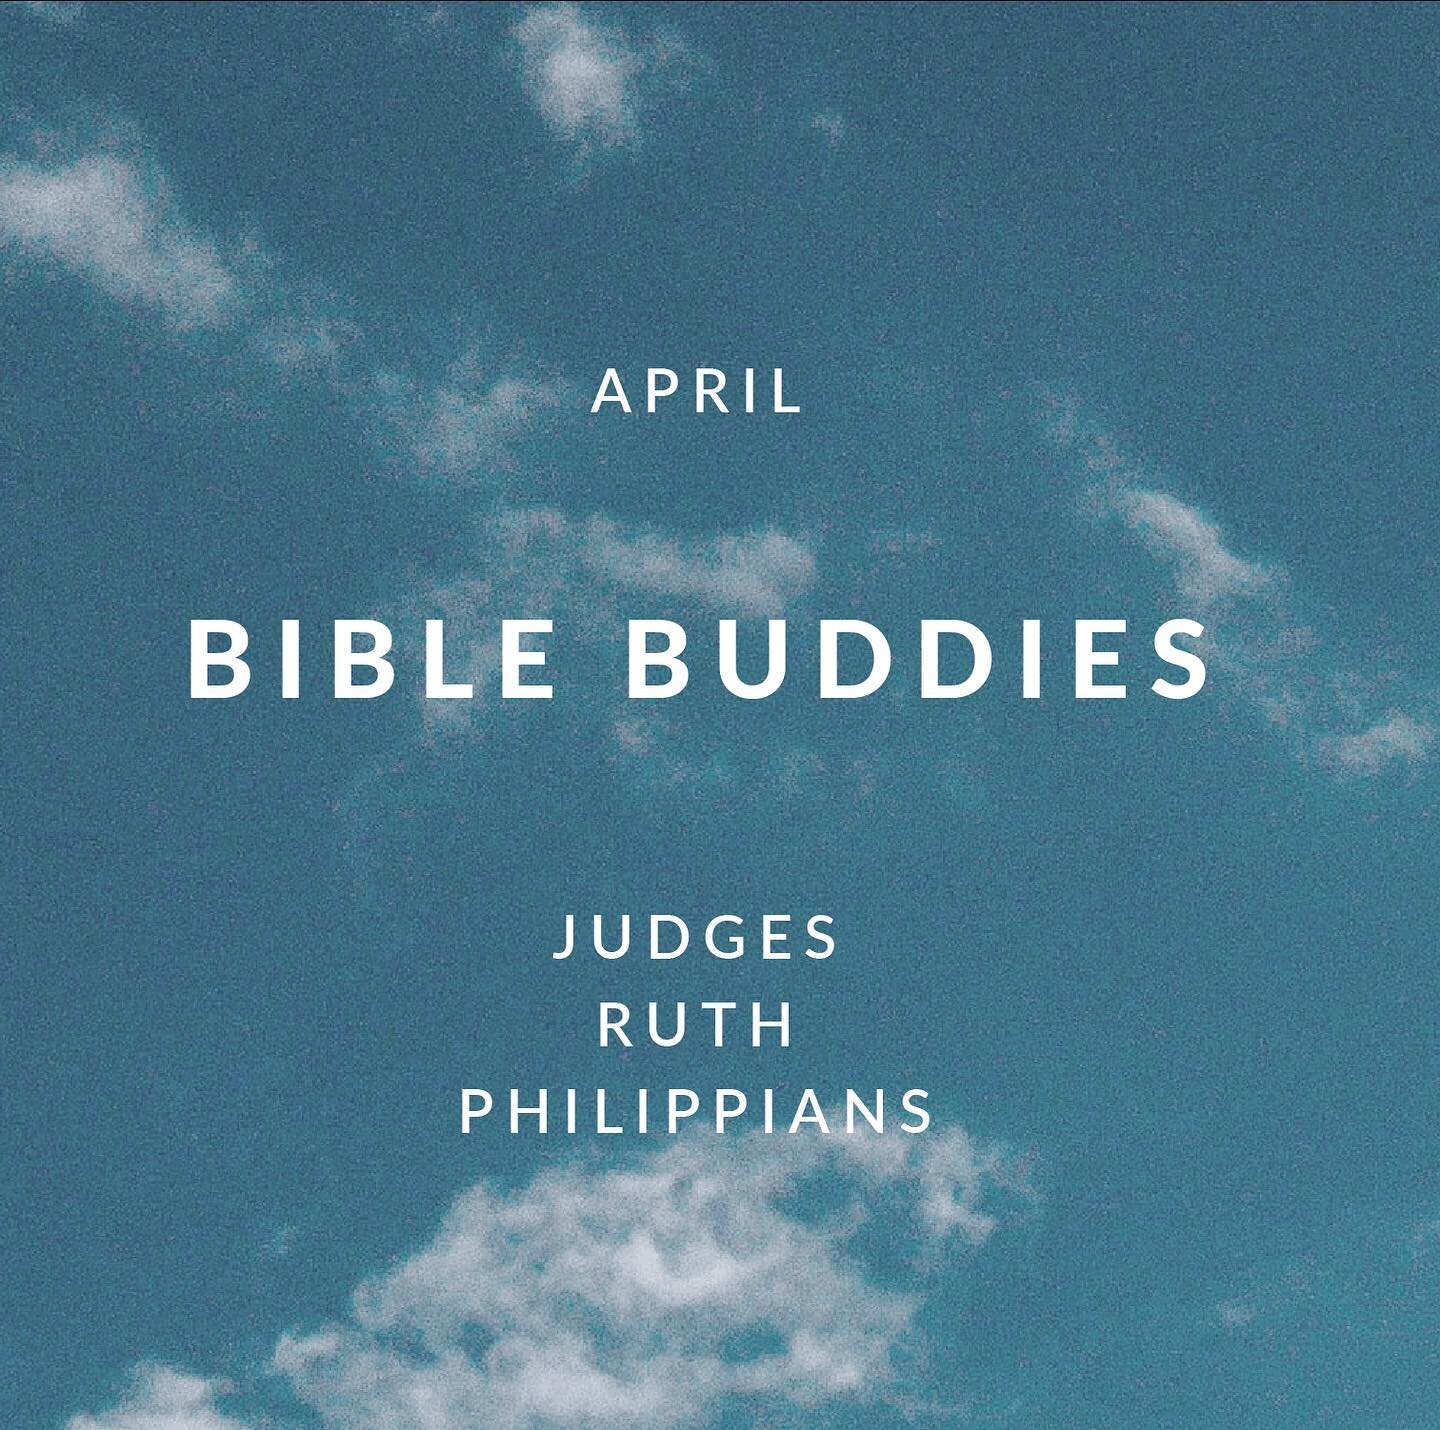 April bible buddies! Pick a partner and read a chapter a day! 📖